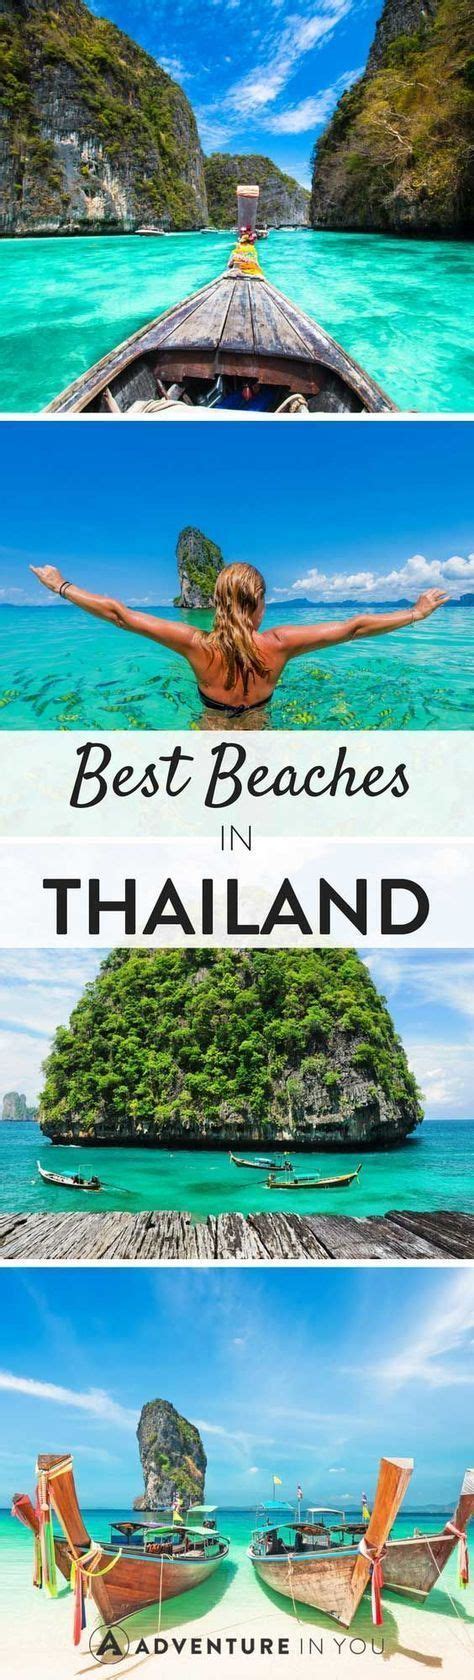 15 Of The Best Beaches In Thailand That You Need To Visit Updated